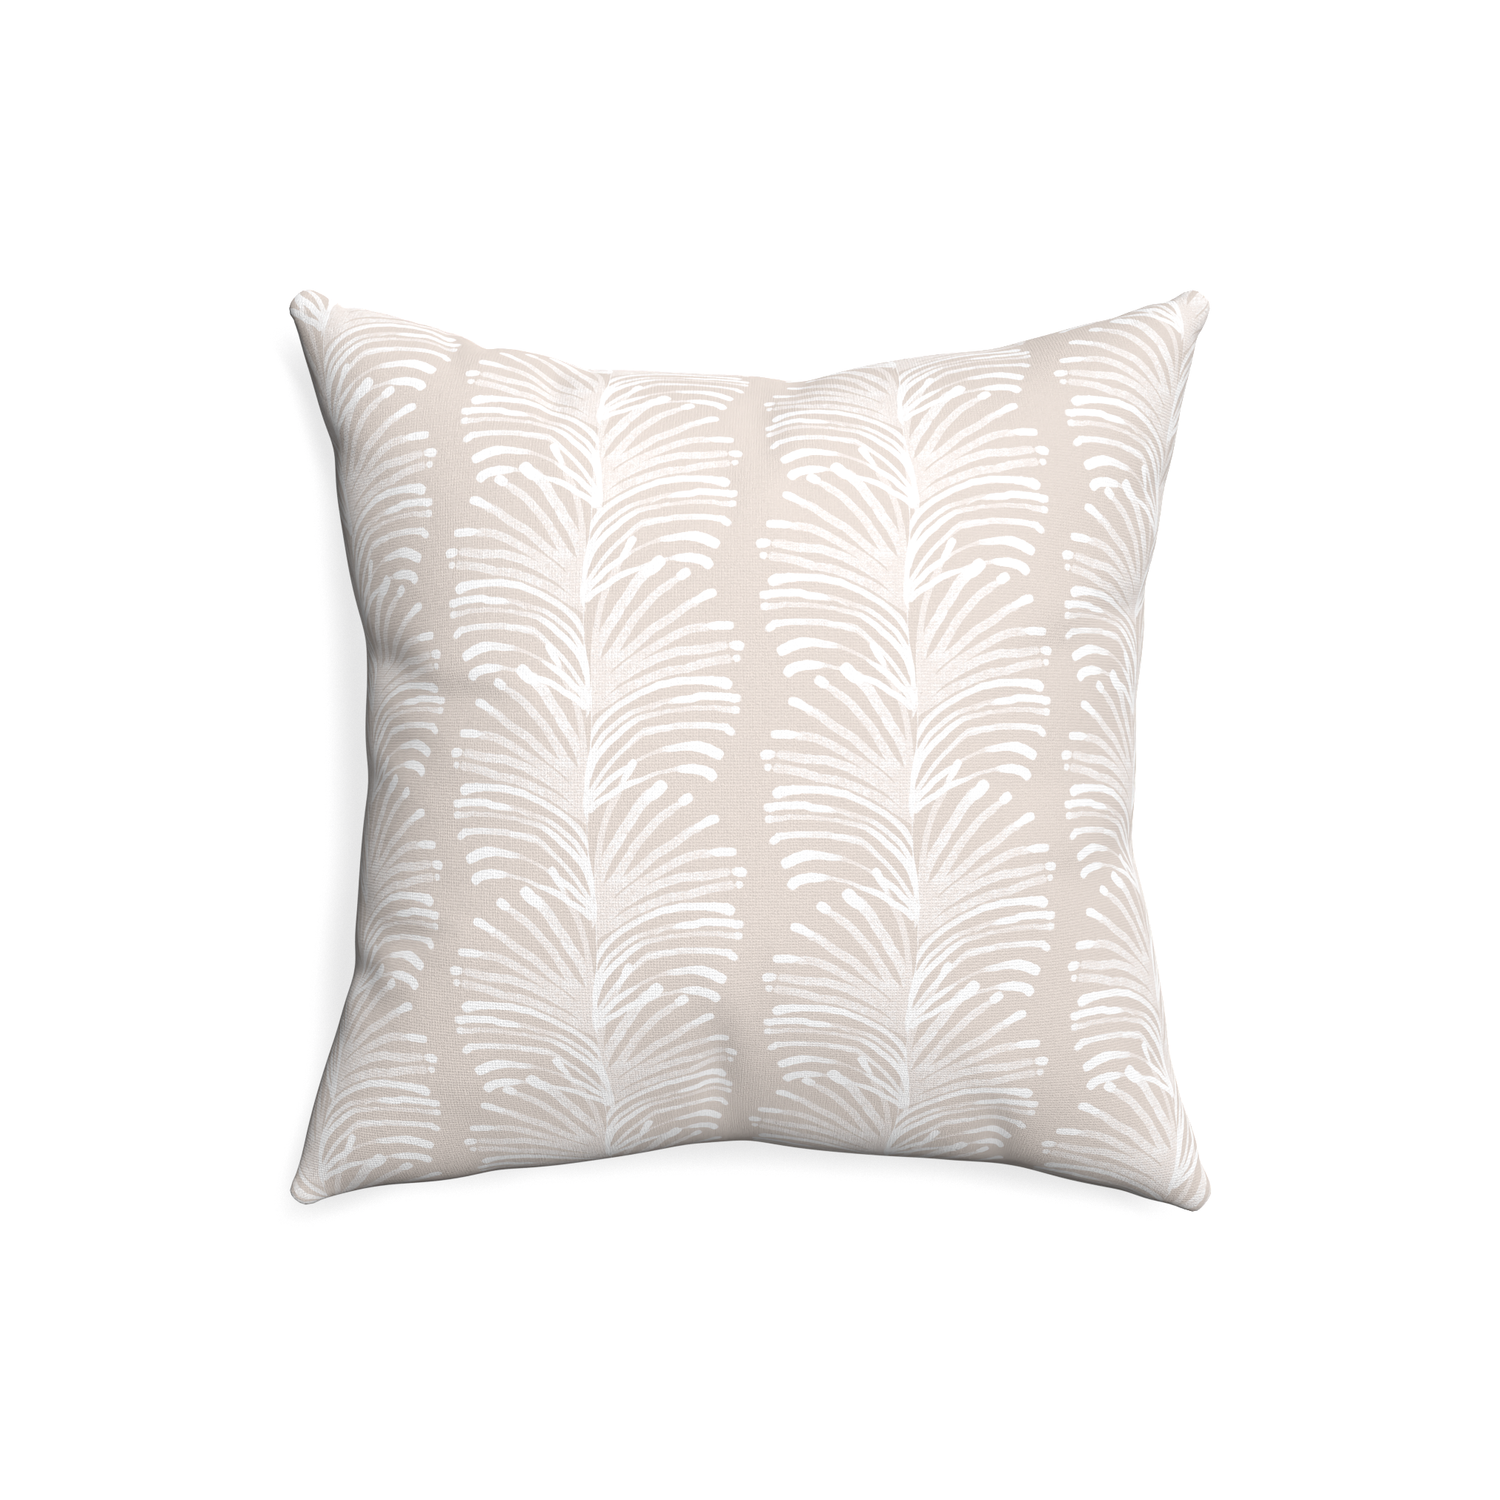 20-square emma sand custom sand colored botanical stripepillow with none on white background